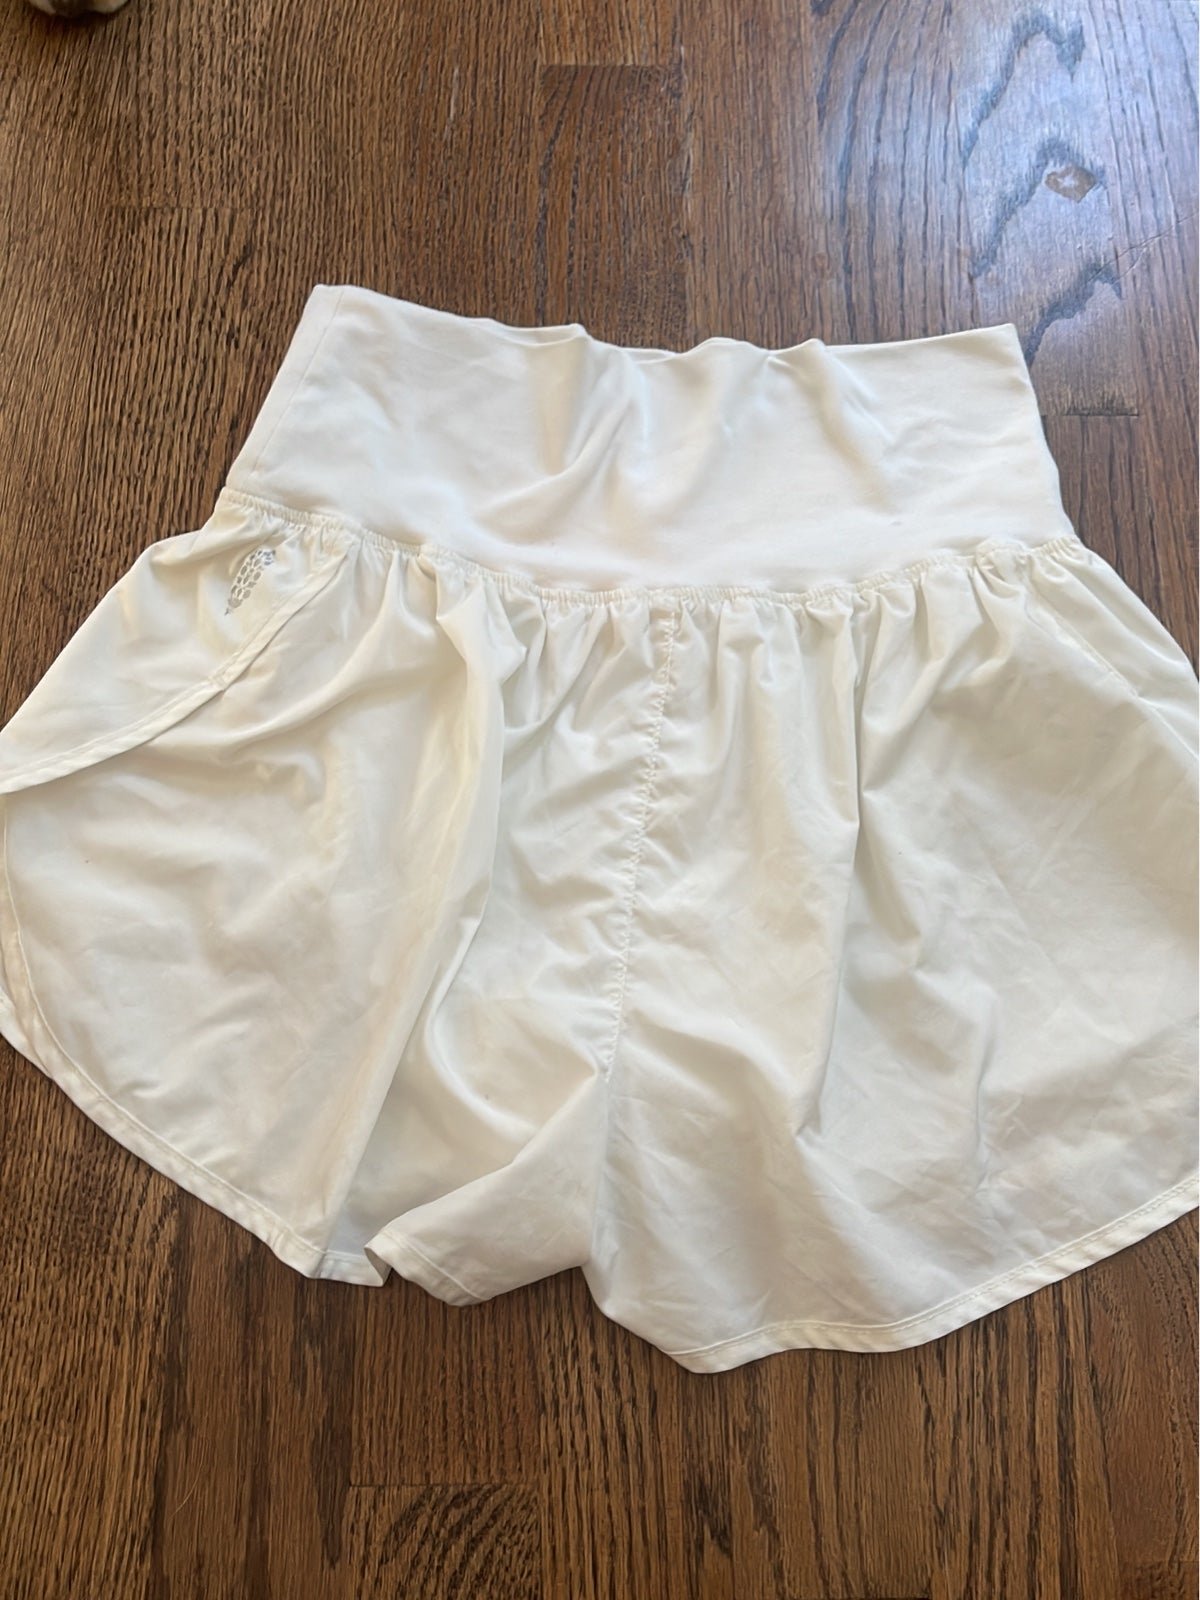 large discount Free people ladies high waisted white athletic flowy shorts sz small pq1bagNfa Wholesale